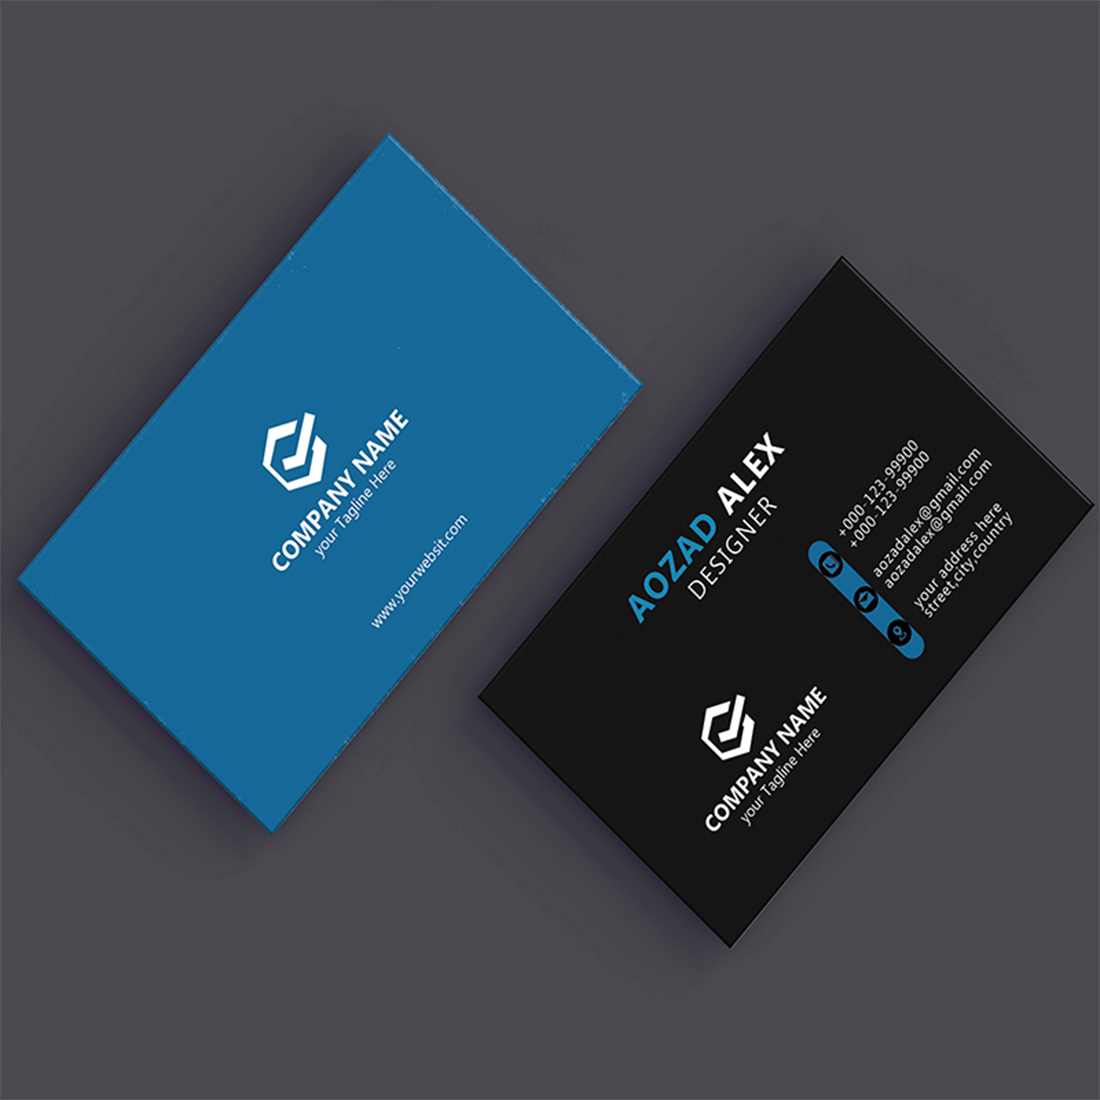 Modern Business Cared Design template 3 item included preview image.